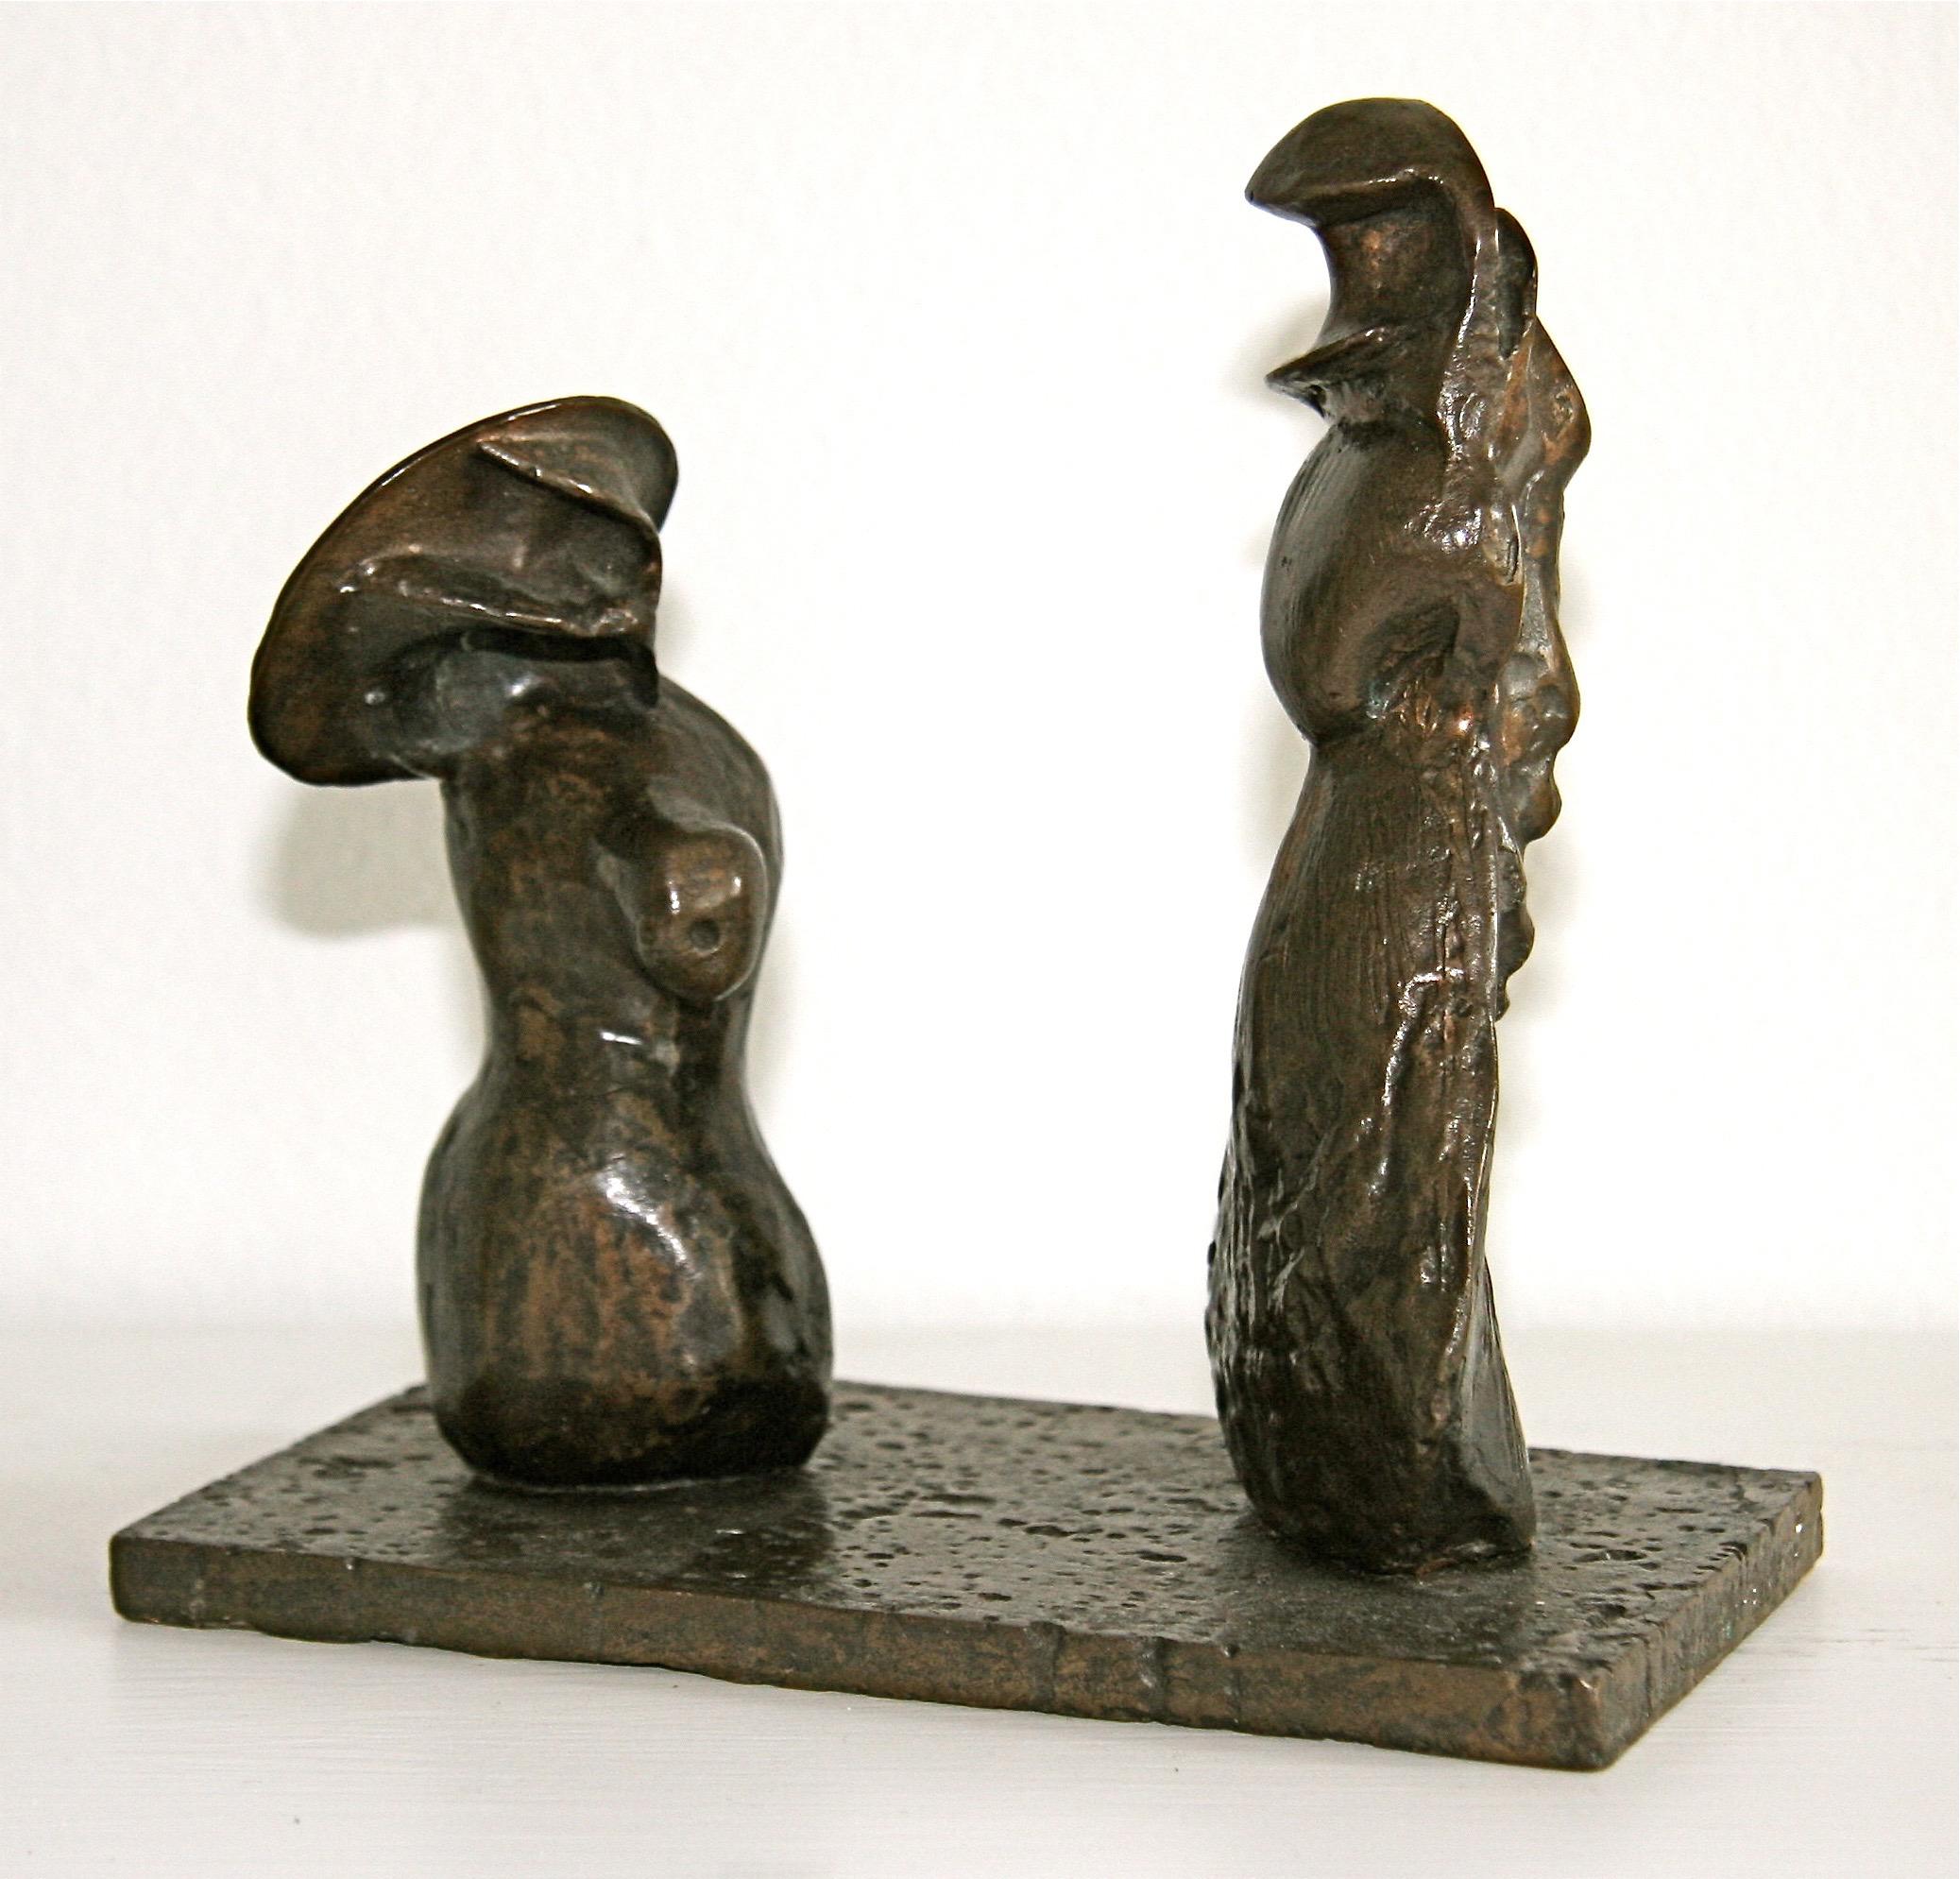 Henry Moore Figurative Sculpture – GIRL AND DWARF